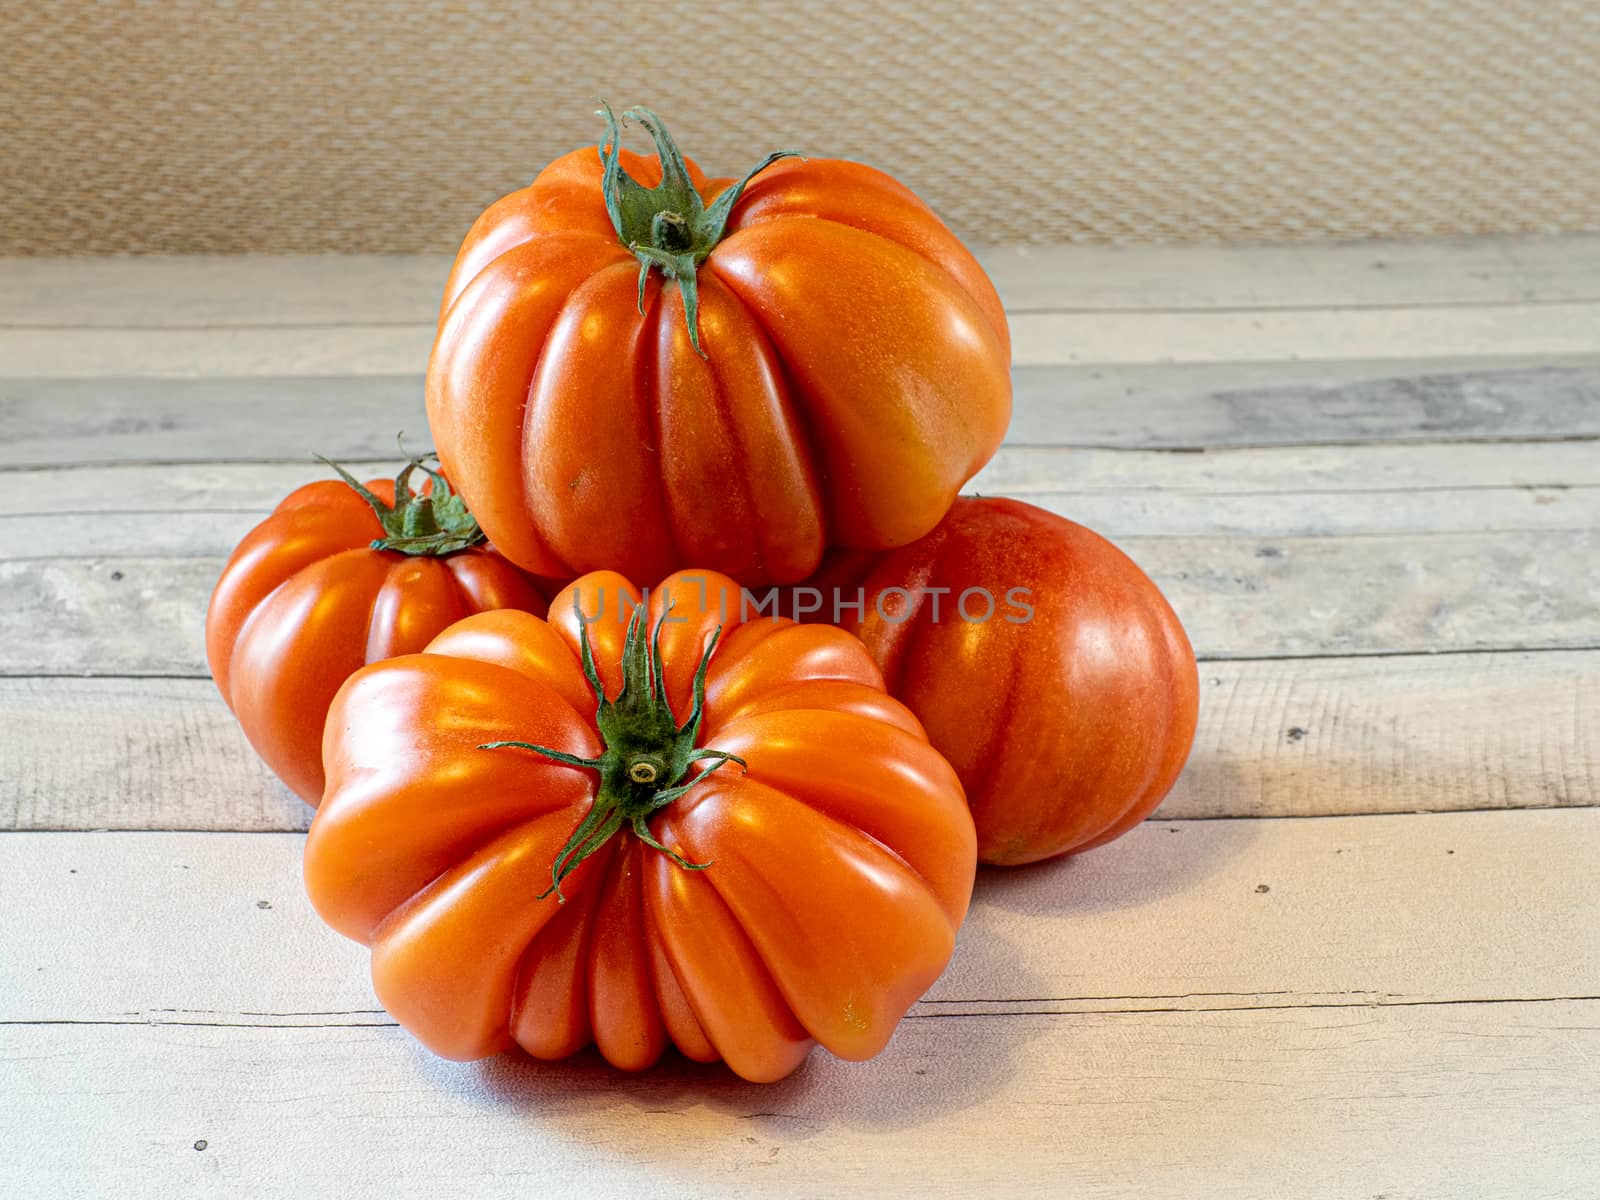 four tomatoes on a light table by jmagfoto